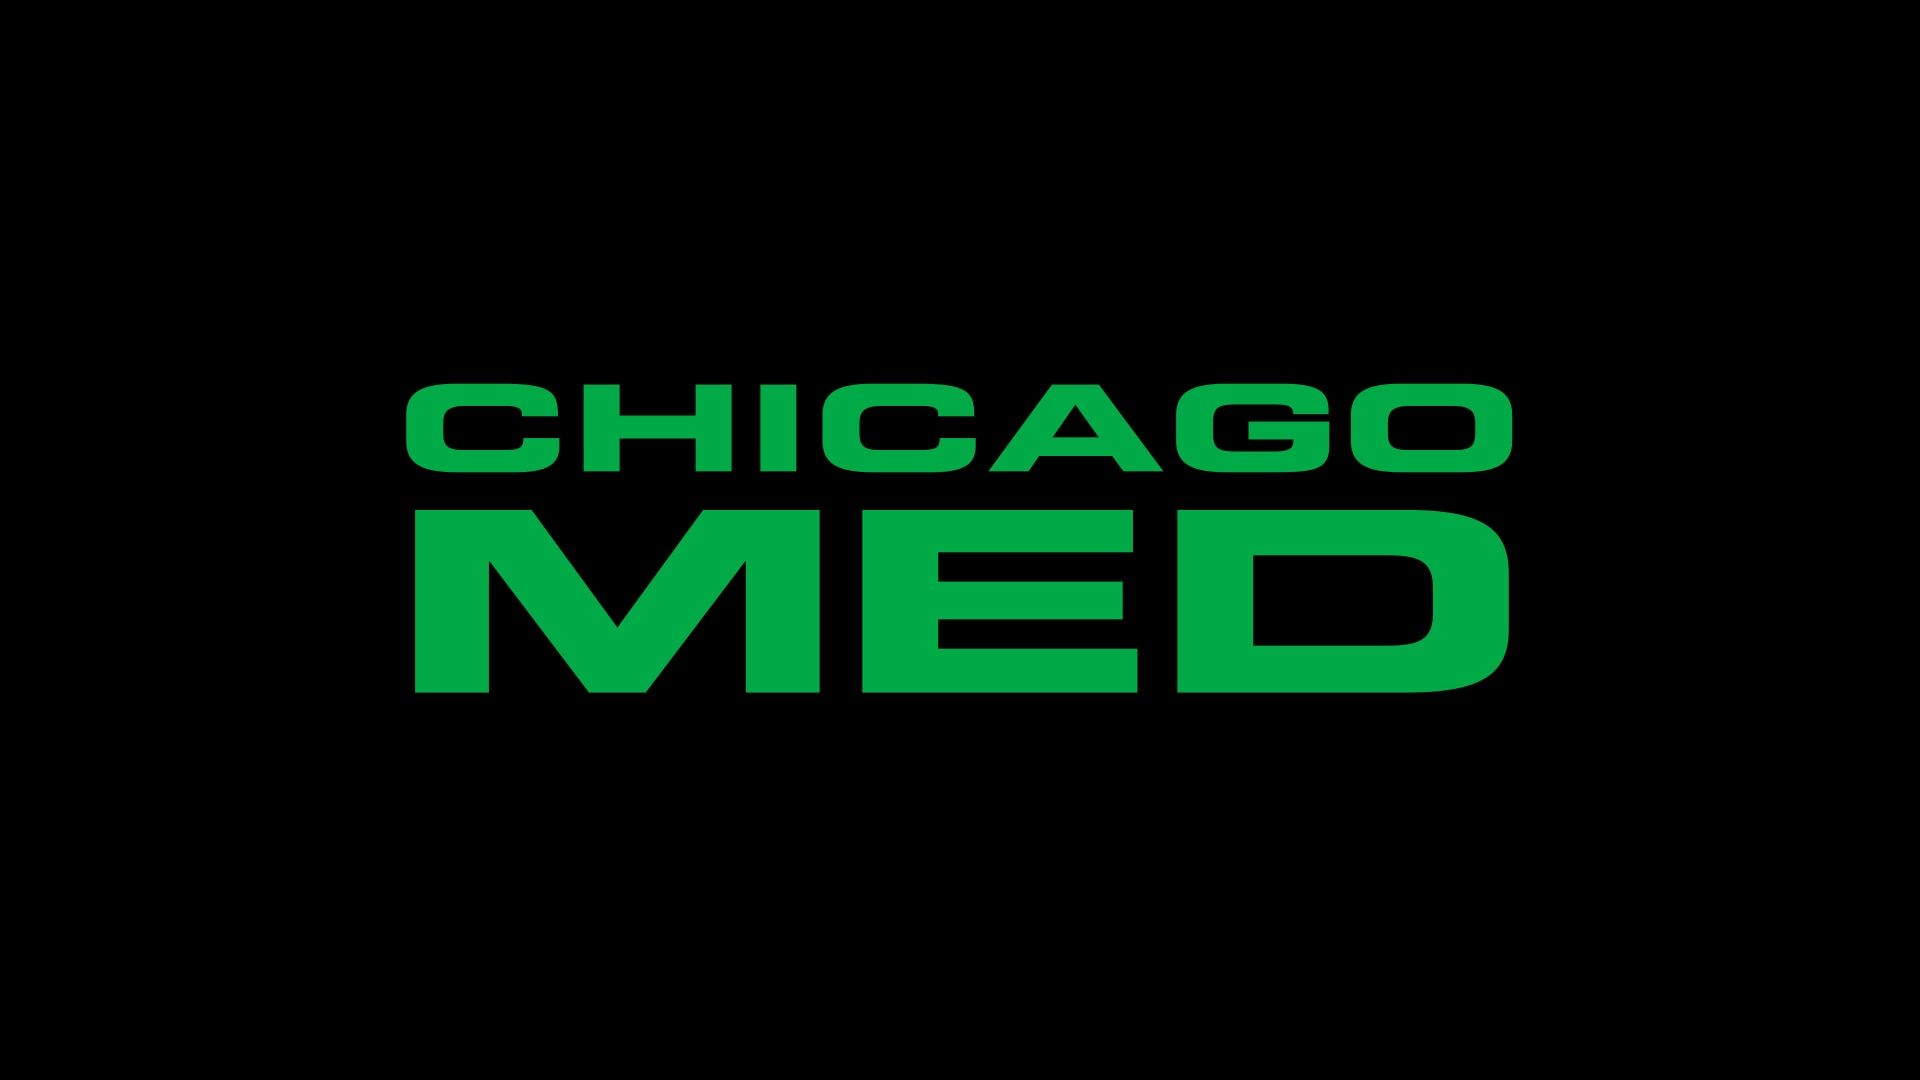 Watch Chicago Med full episodes online free